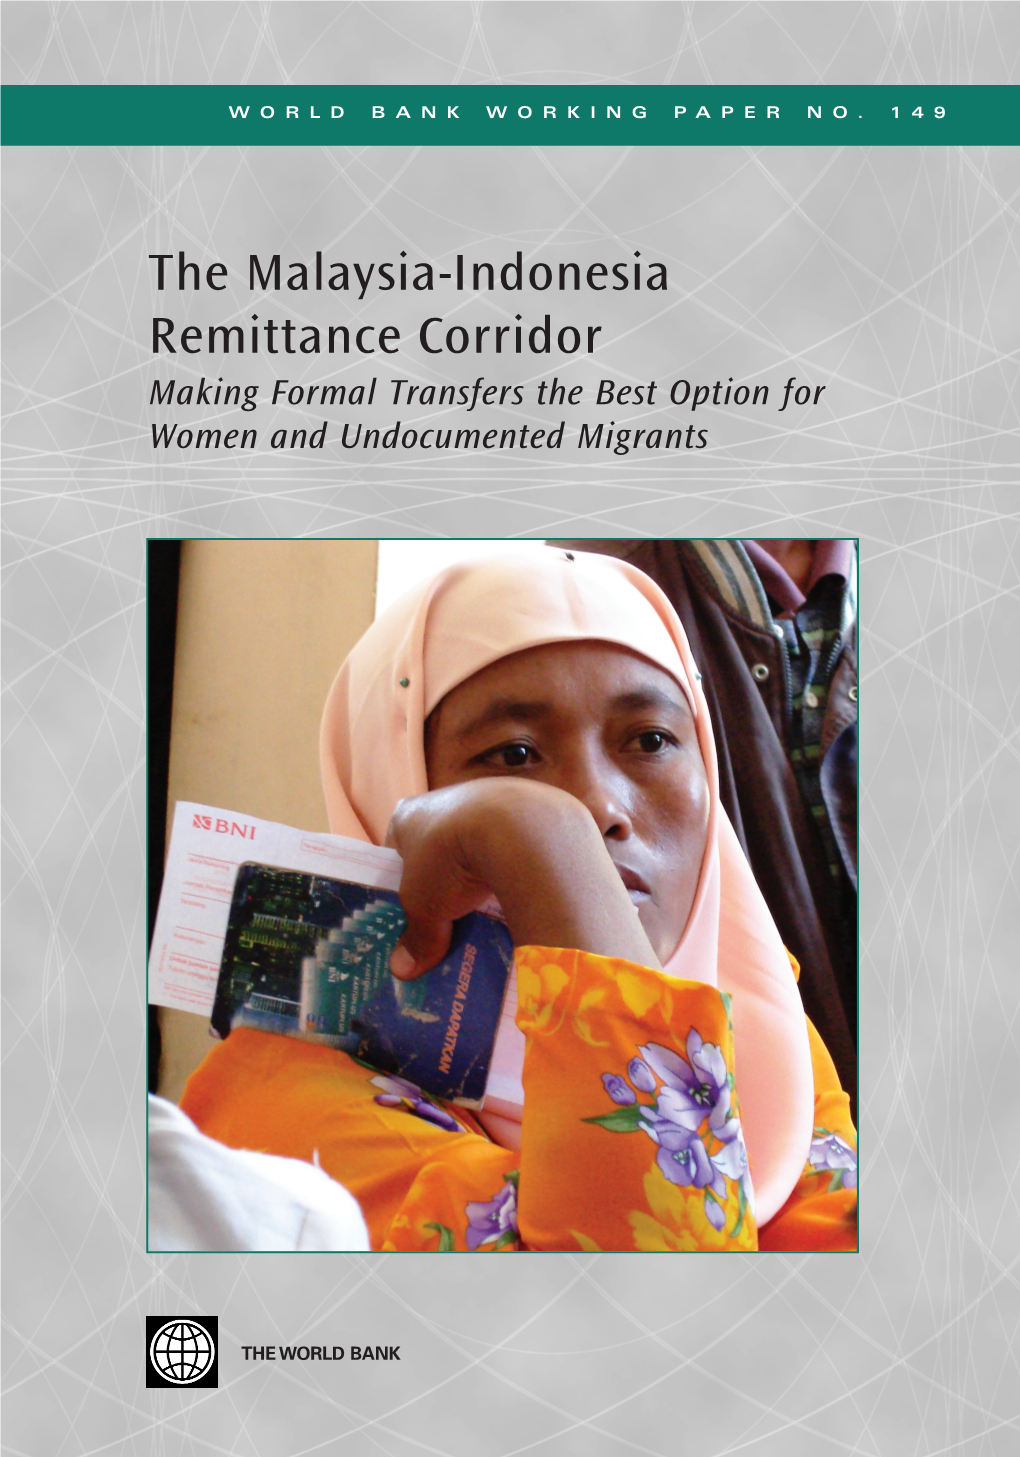 The Malaysia-Indonesia Remittance Corridor Is Part of the World Bank Working Paper Series